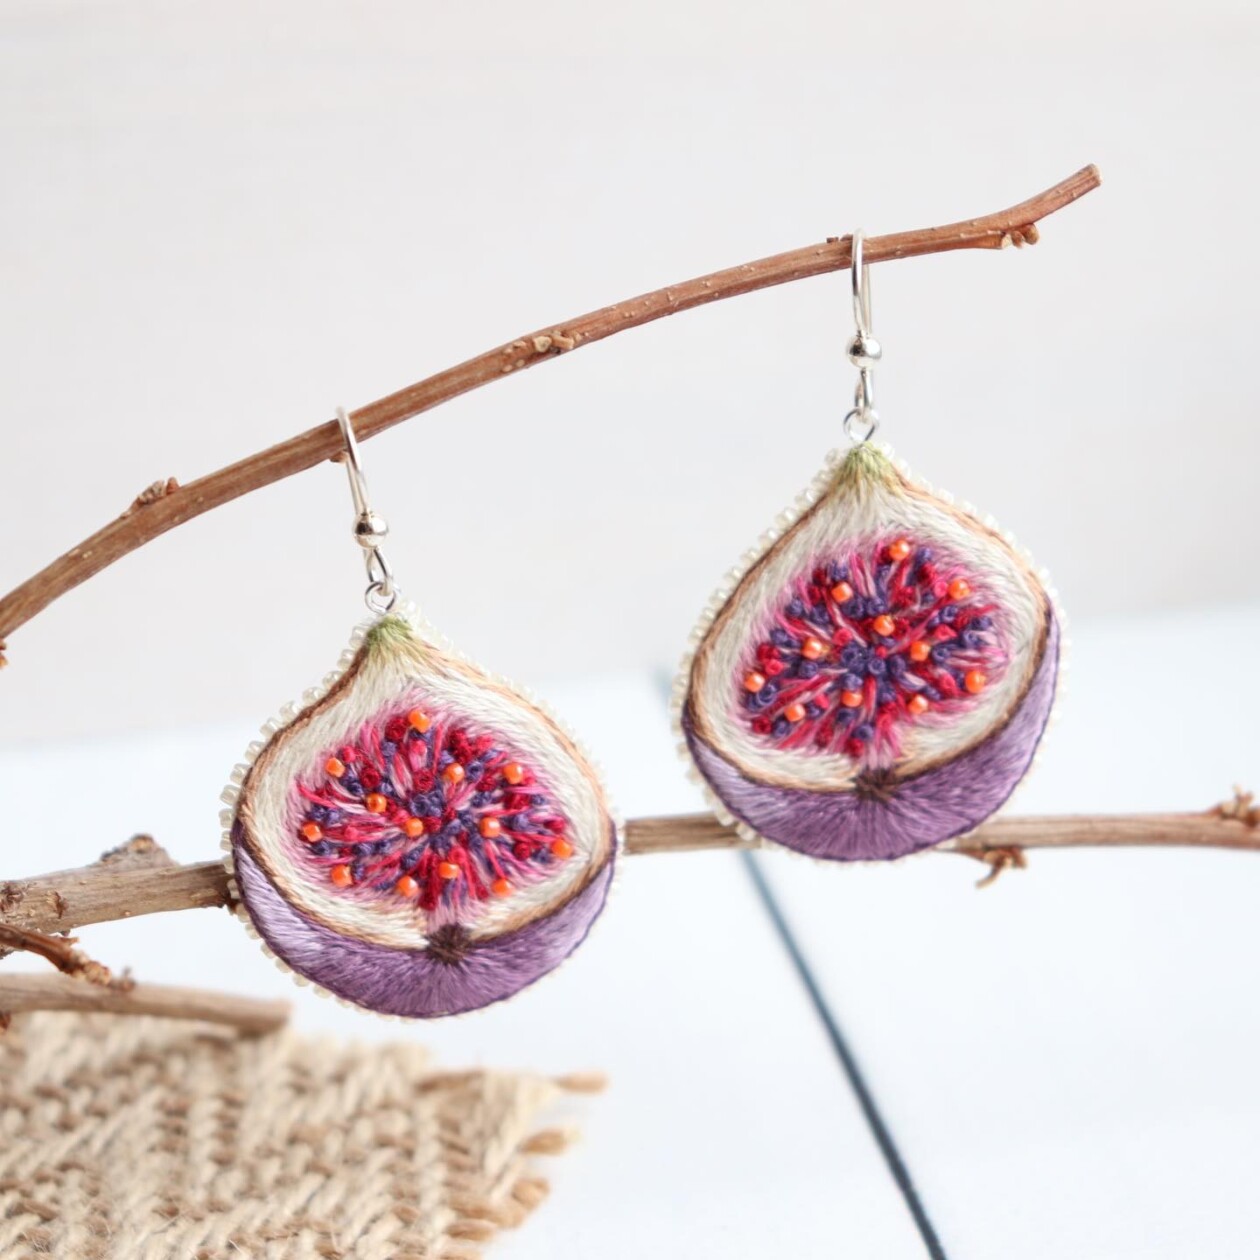 Eye Catching Handmade Embroidered Earrings By Vivaembr (10)